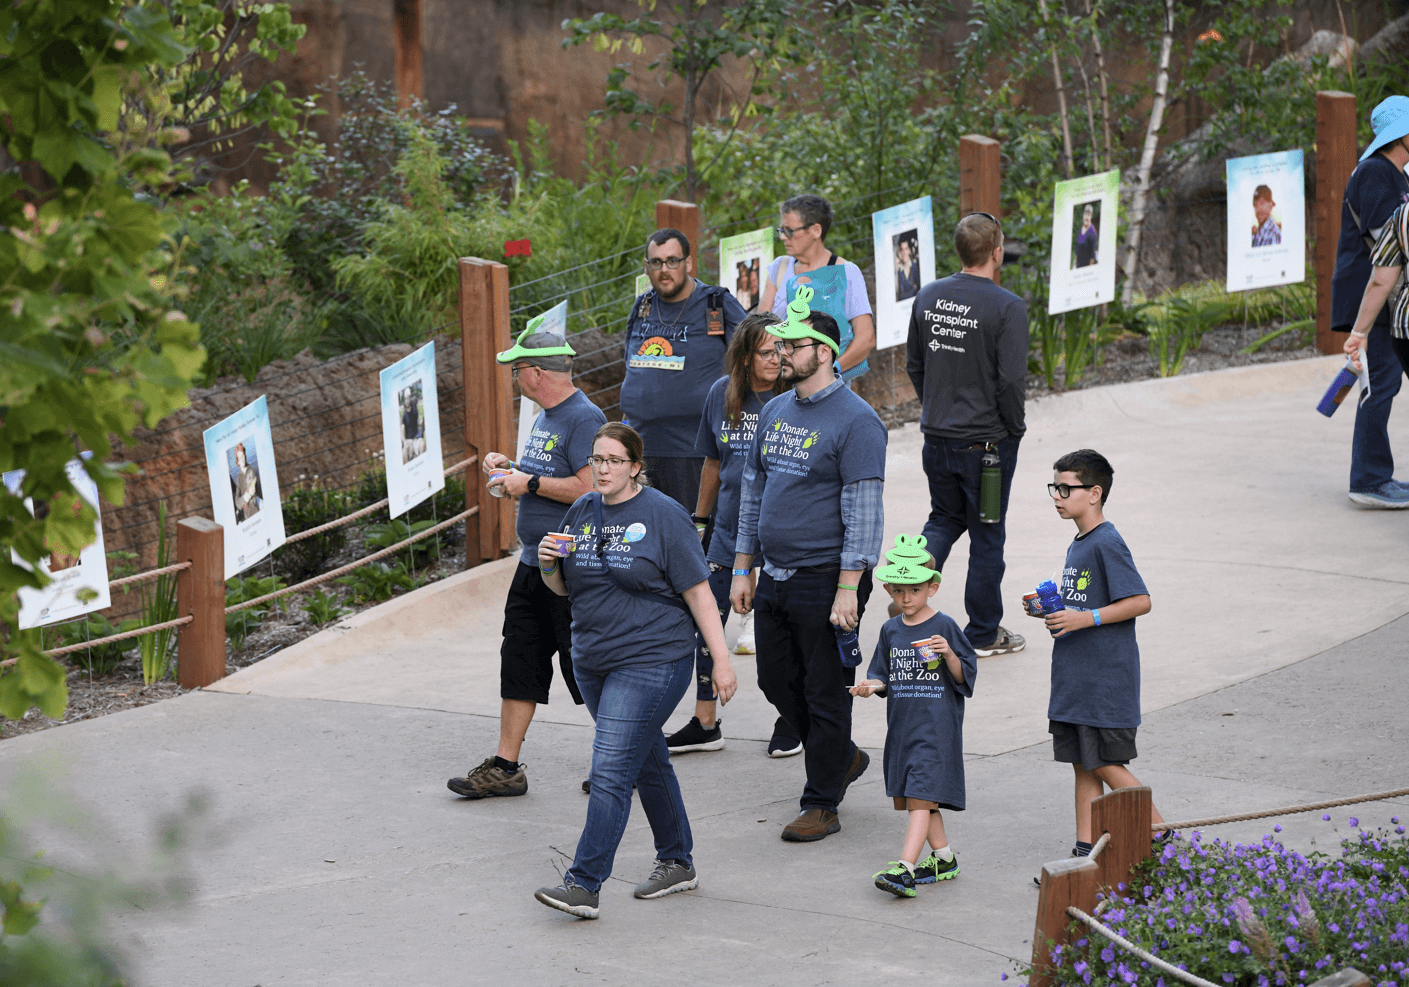 Families exploring the Celebration of Life Trail at the John Ball Zoo